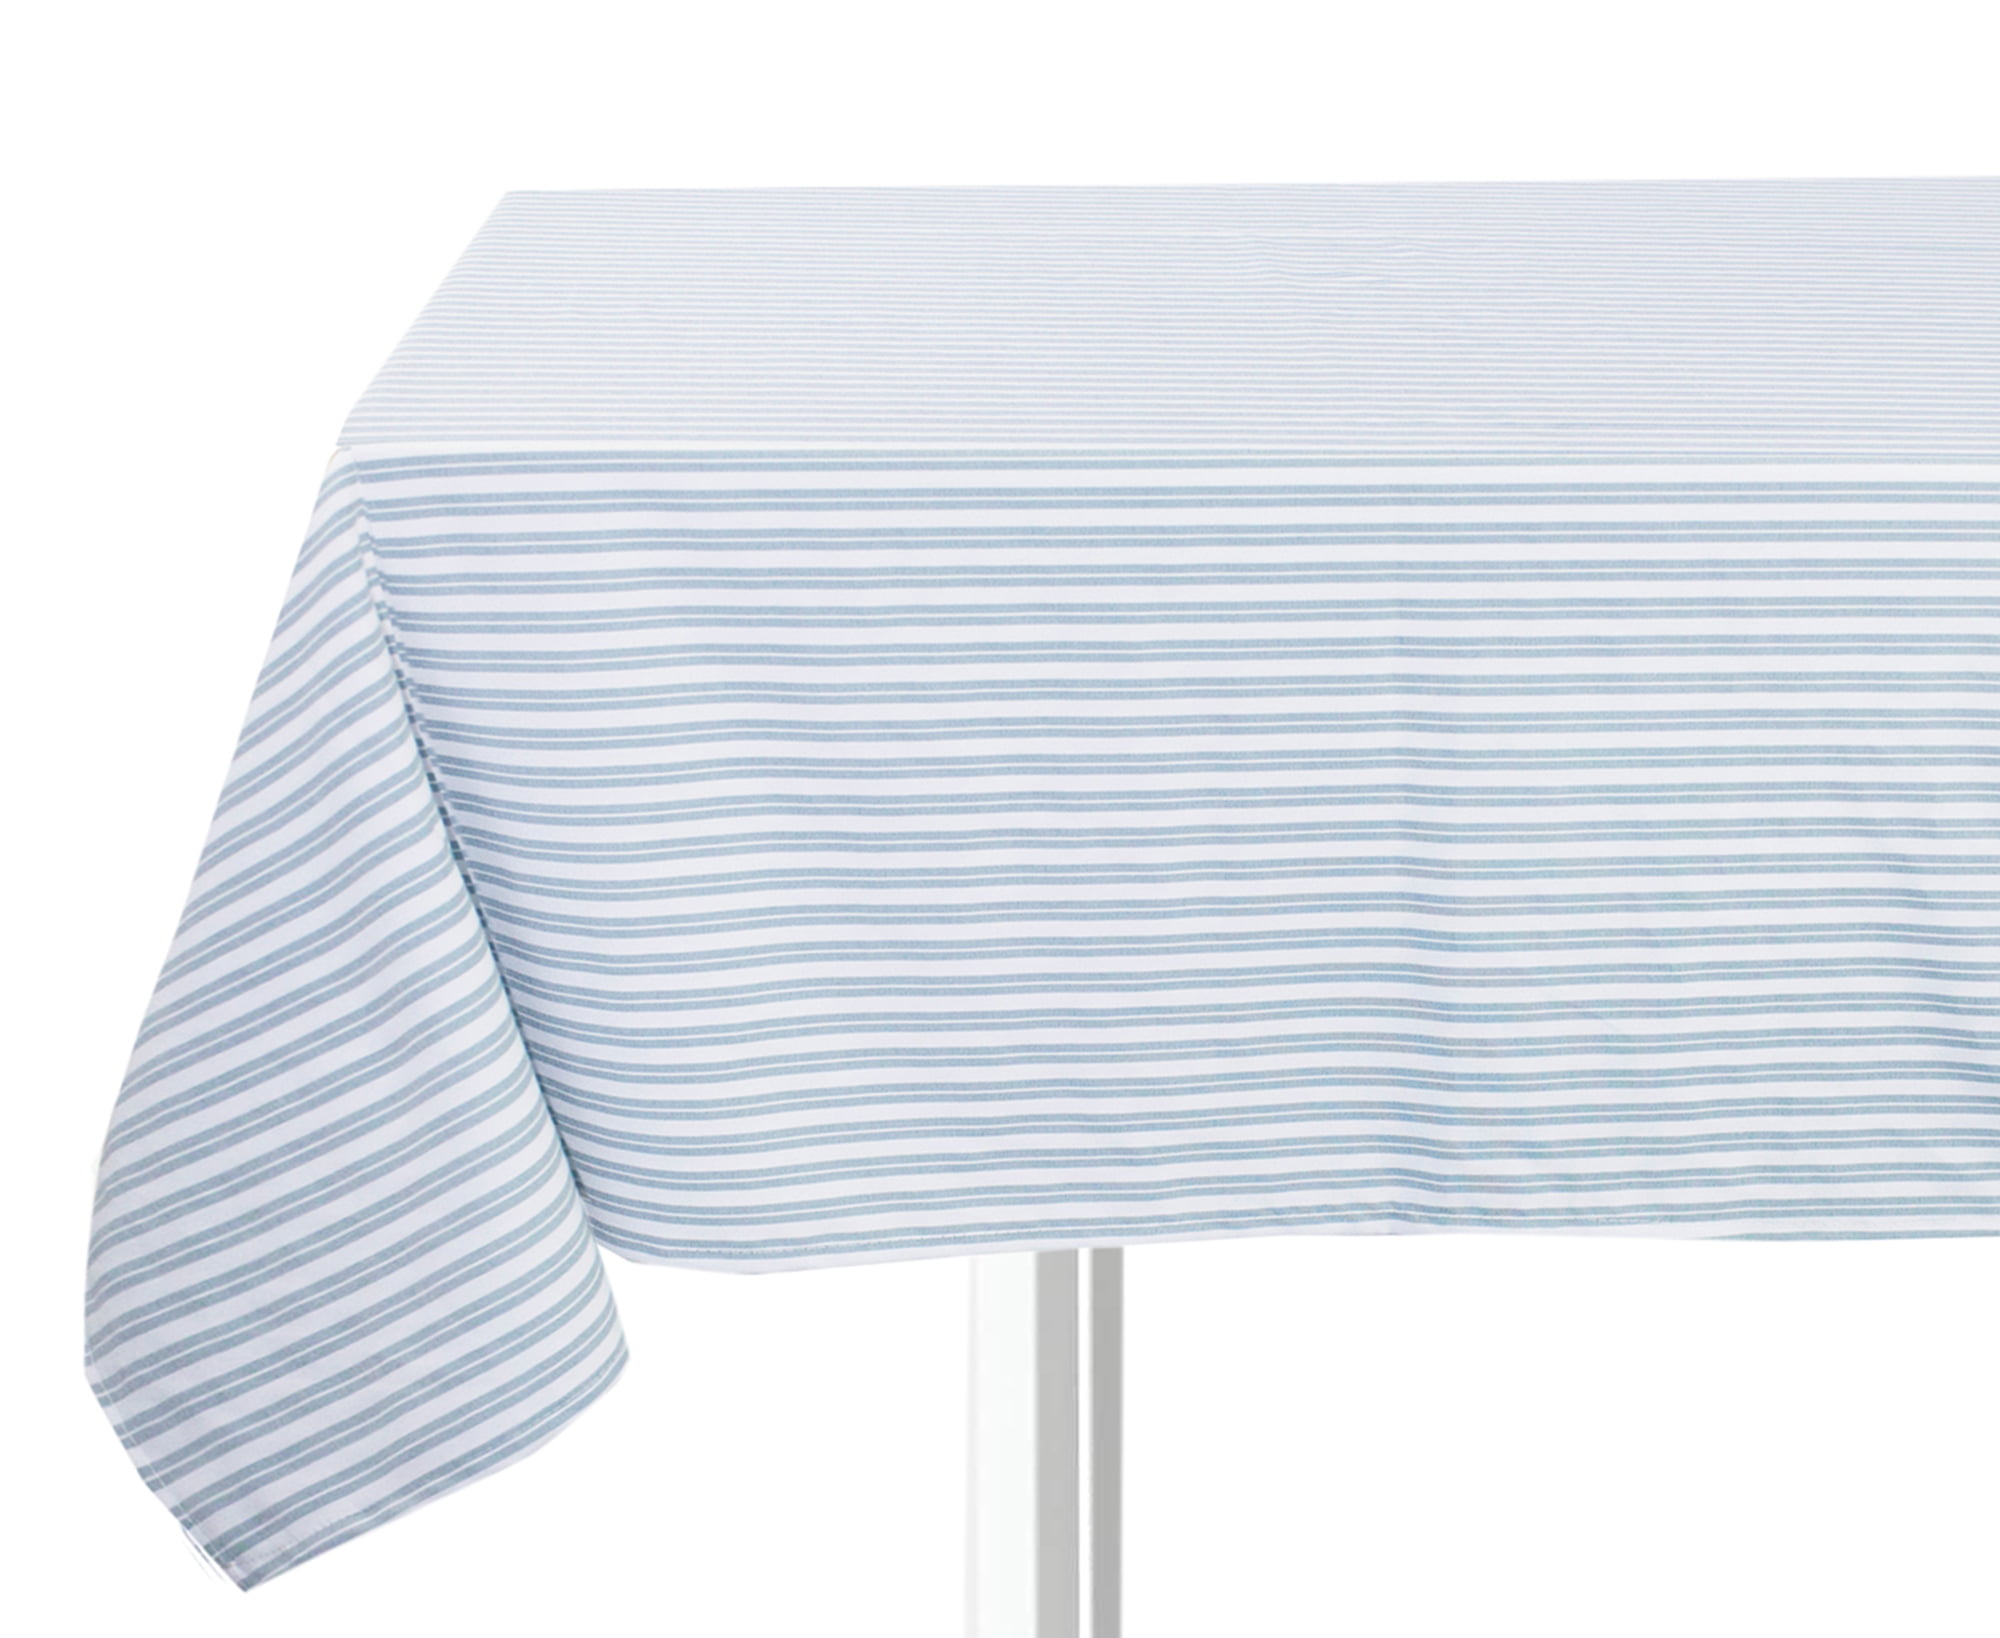 Family Gathering Fennco Styles Classic Solid Tablecloth 56 x 56 Special Events and Home Décor Light Blue Cover for Everyday Use Outdoor Parties